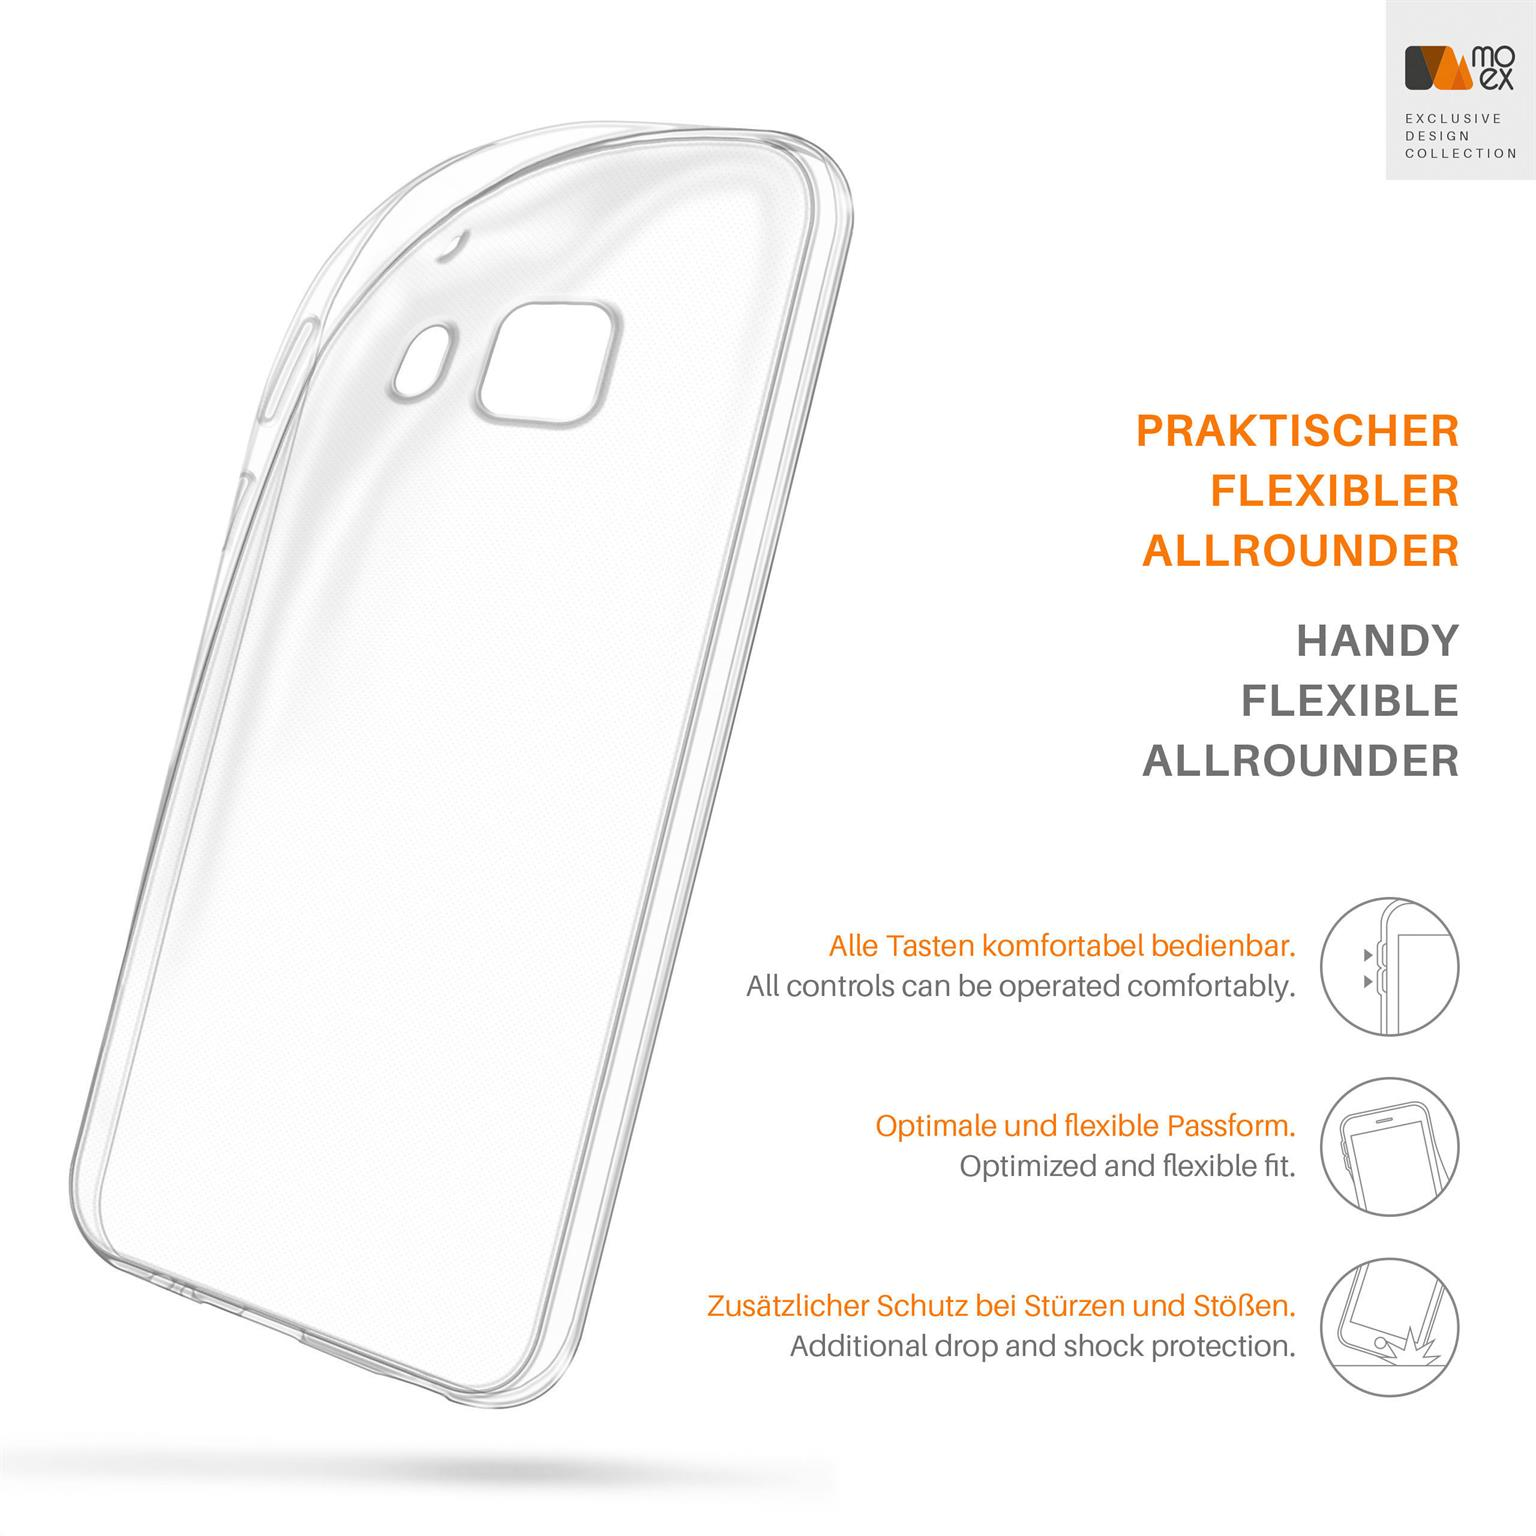 Backcover, MOEX Aero Crystal-Clear HTC, One S9, Case,